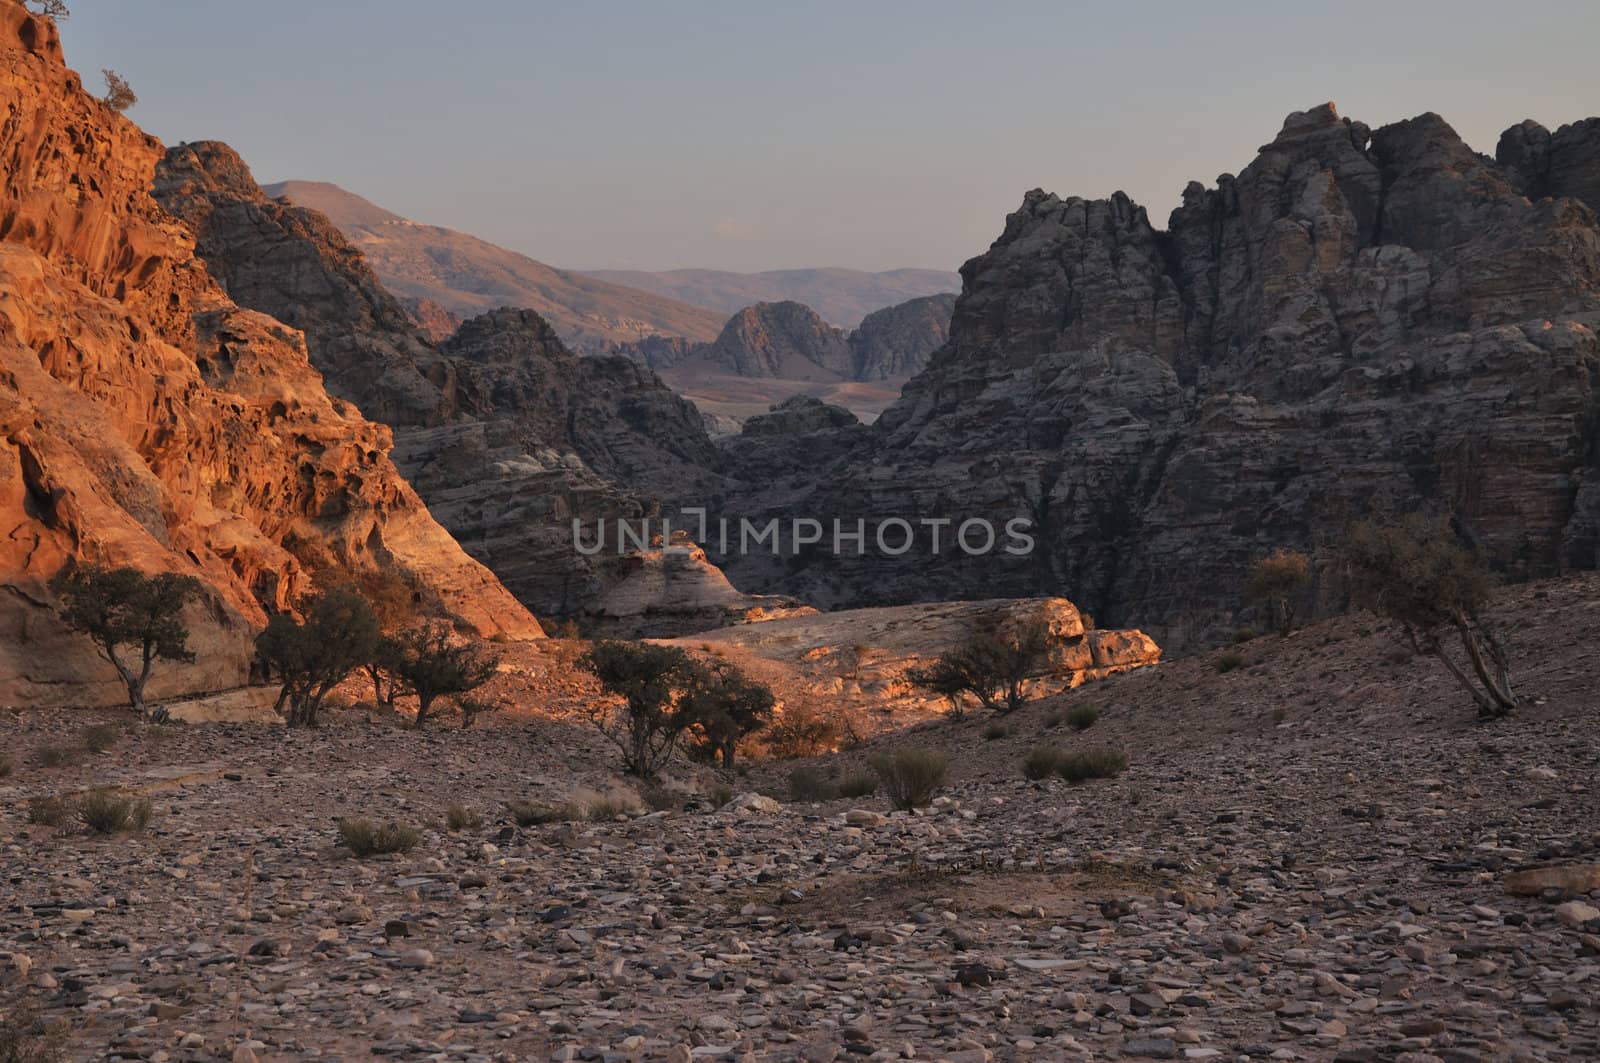 Around Petra. If you go up to the Monastery you have lot of fantastic views around you, not just the Monastery.